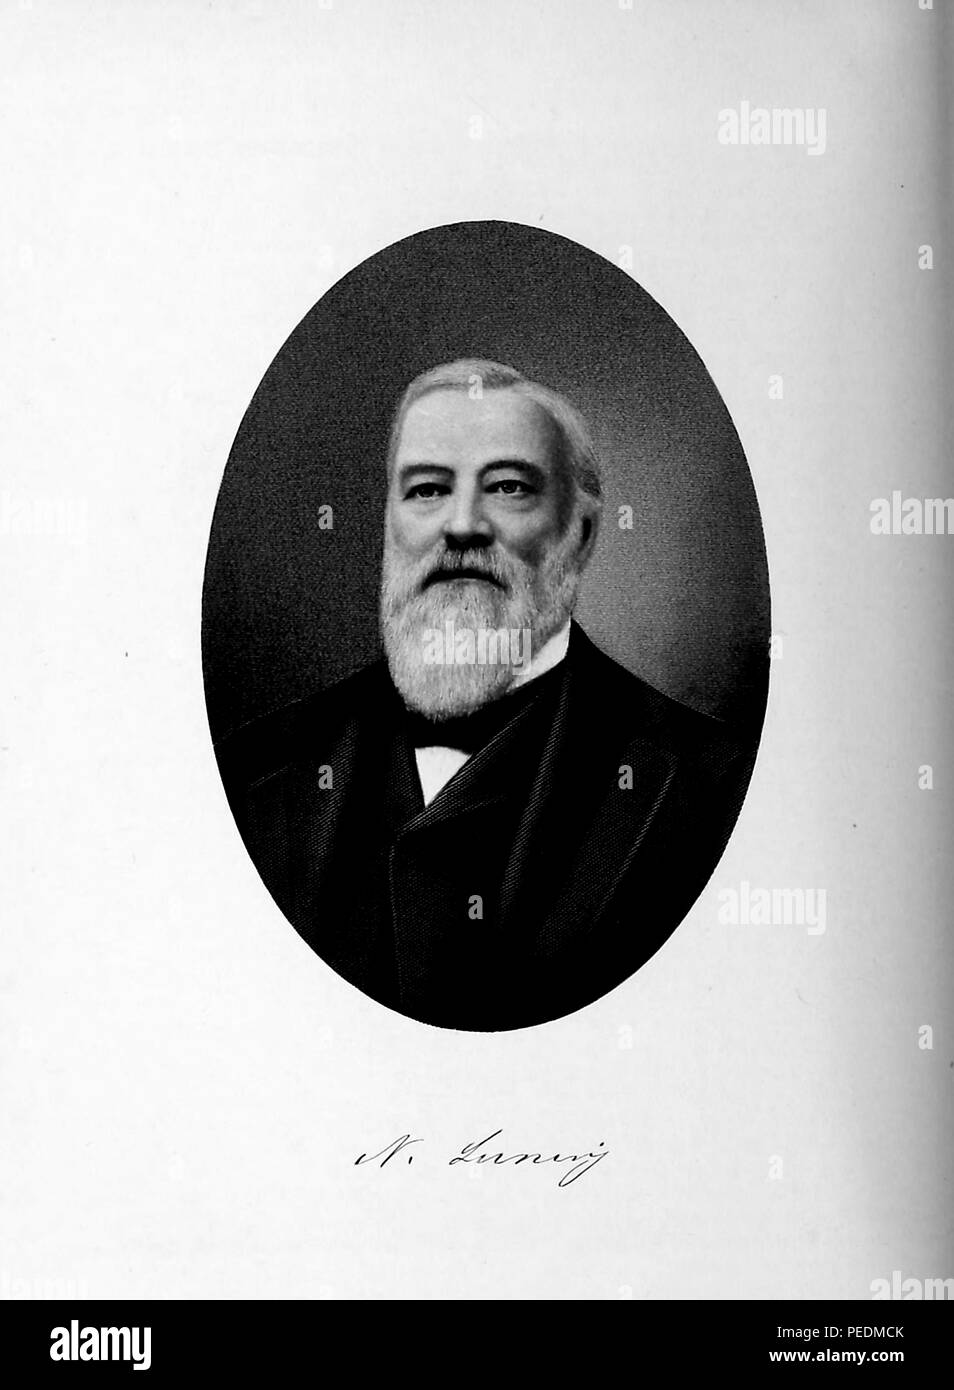 Black and white portrait print of prominent California pioneer and businessman Nicholas Luning, with a white, beard, dark suit and tie, and a serious expression on his face, from the volume 'History of the State of California and Biographical Record of Oakland and Environs, ' authored by JM (James Miller) Guinn, and published in Los Angeles by the Historic Record Co, 1907. Courtesy Internet Archive. () Stock Photo